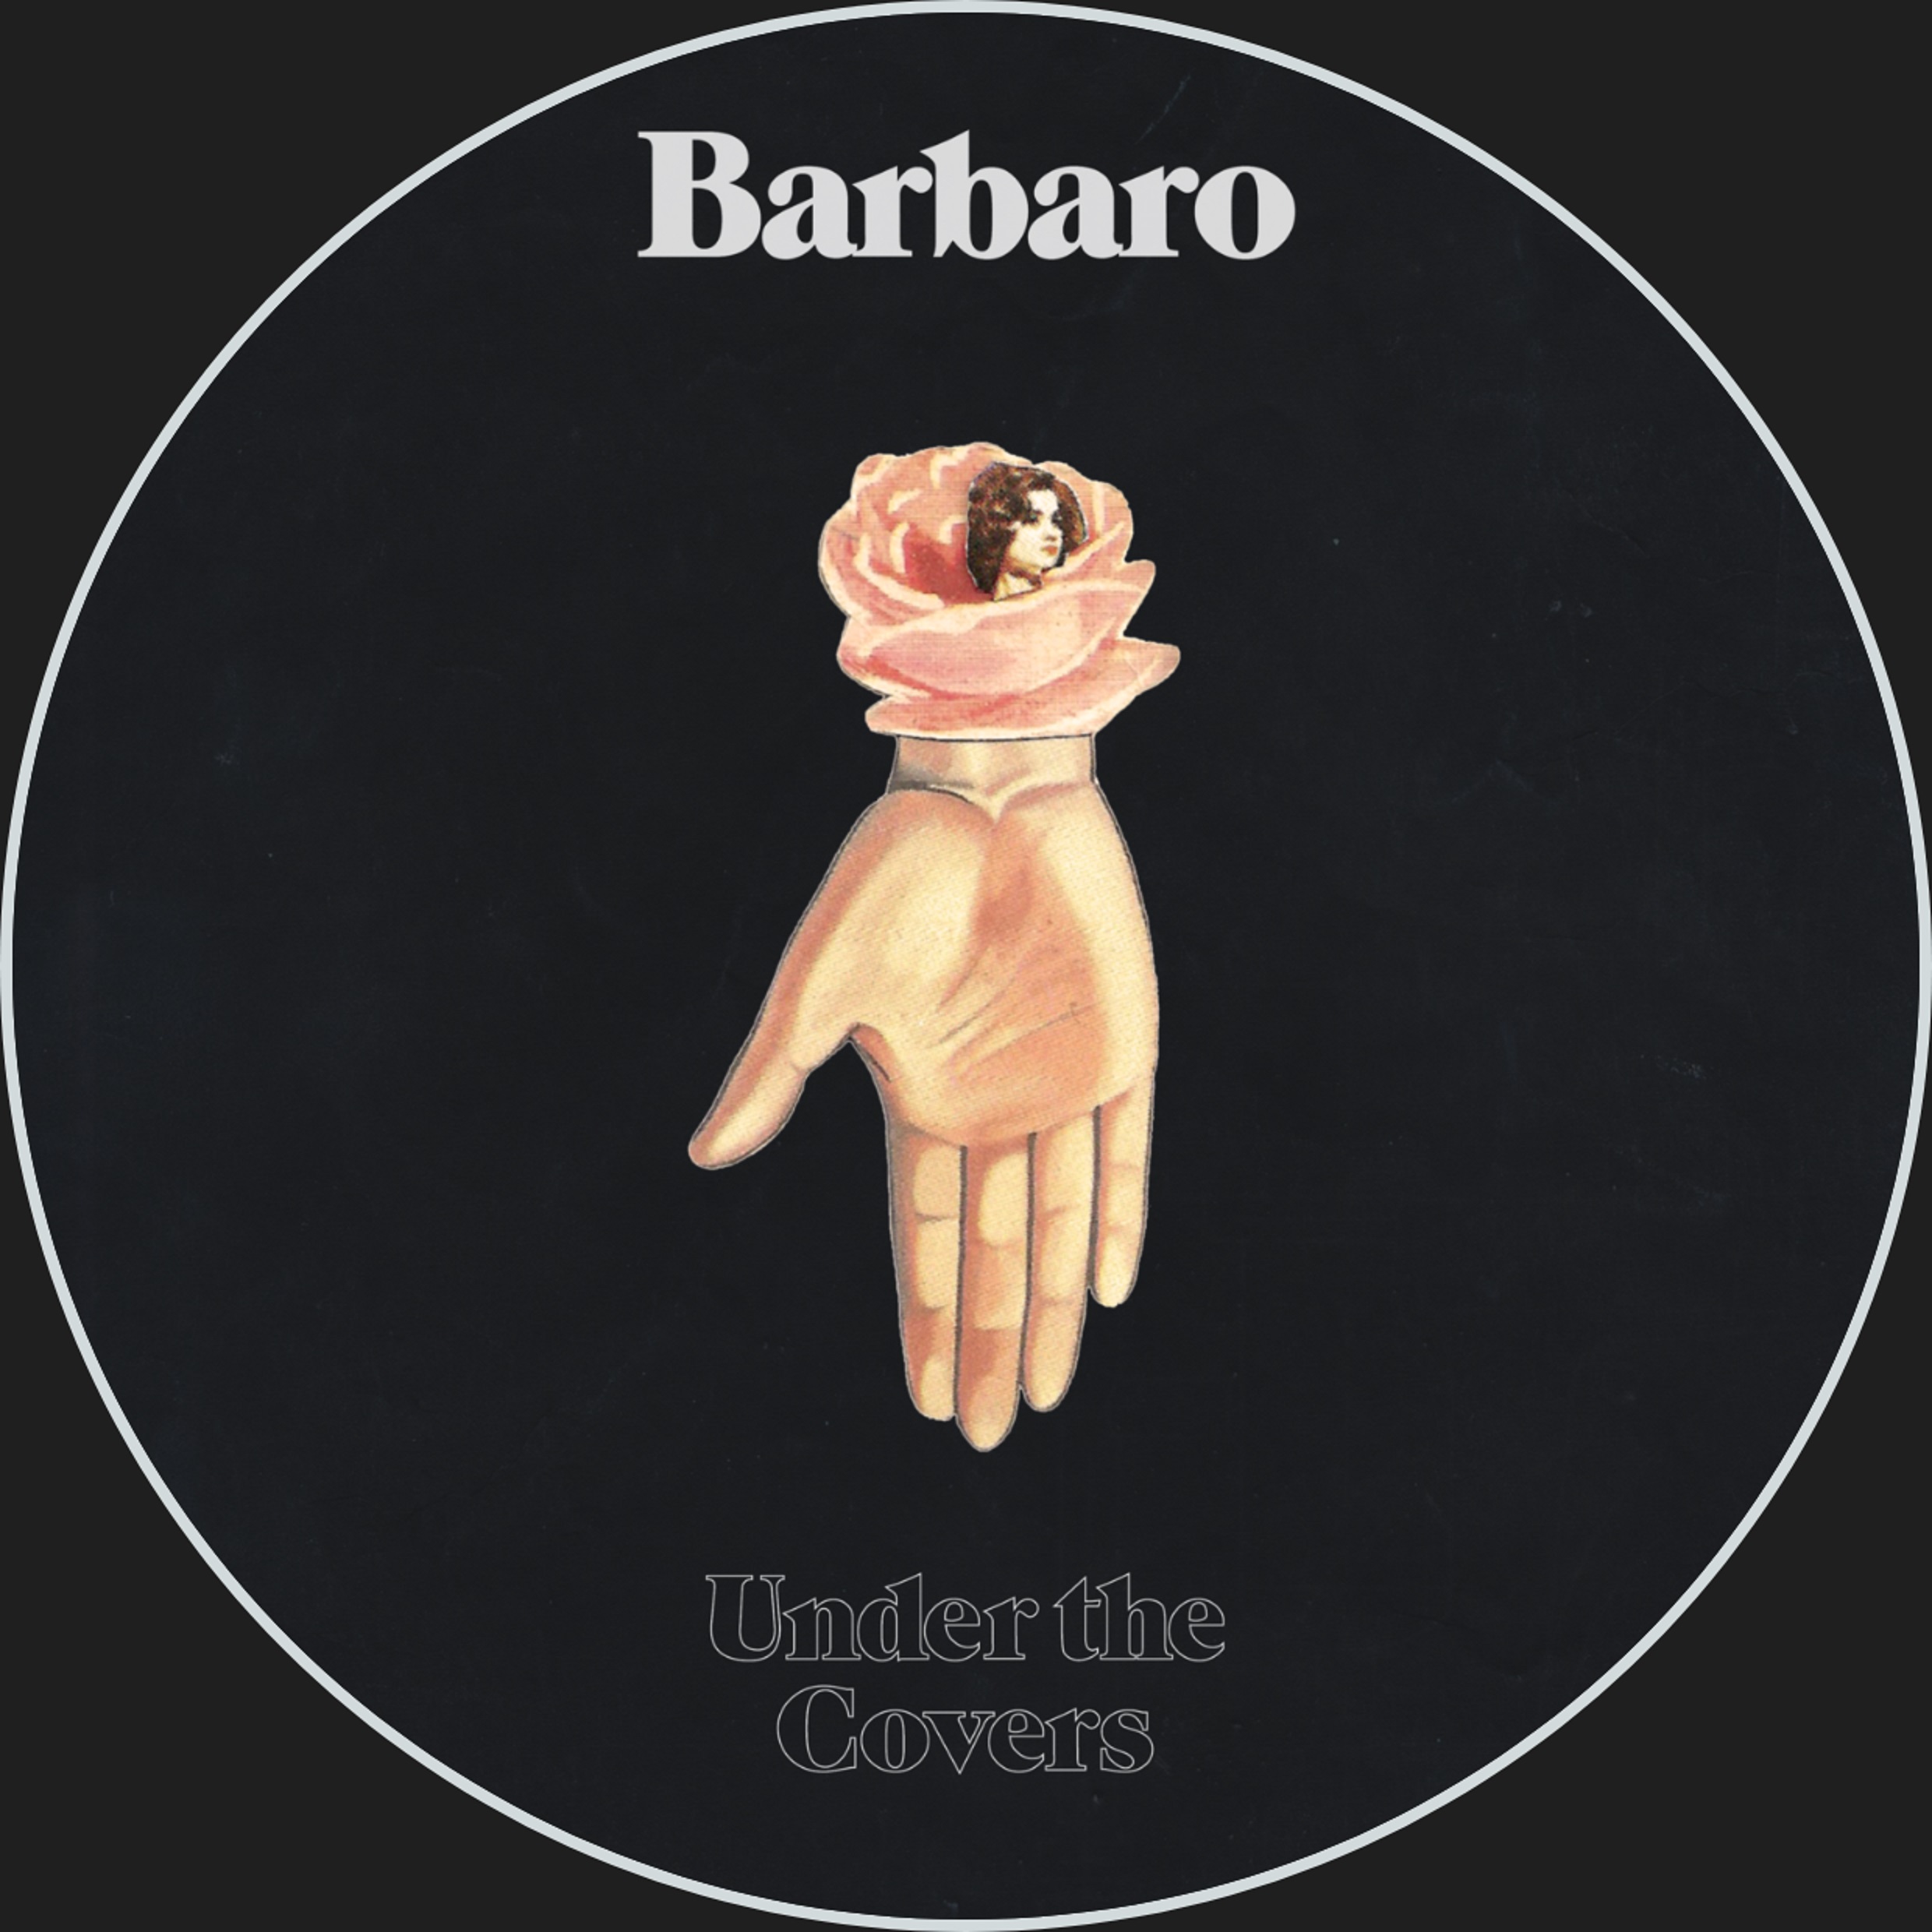 Barbaro releases their new EP, ‘Under the Covers’